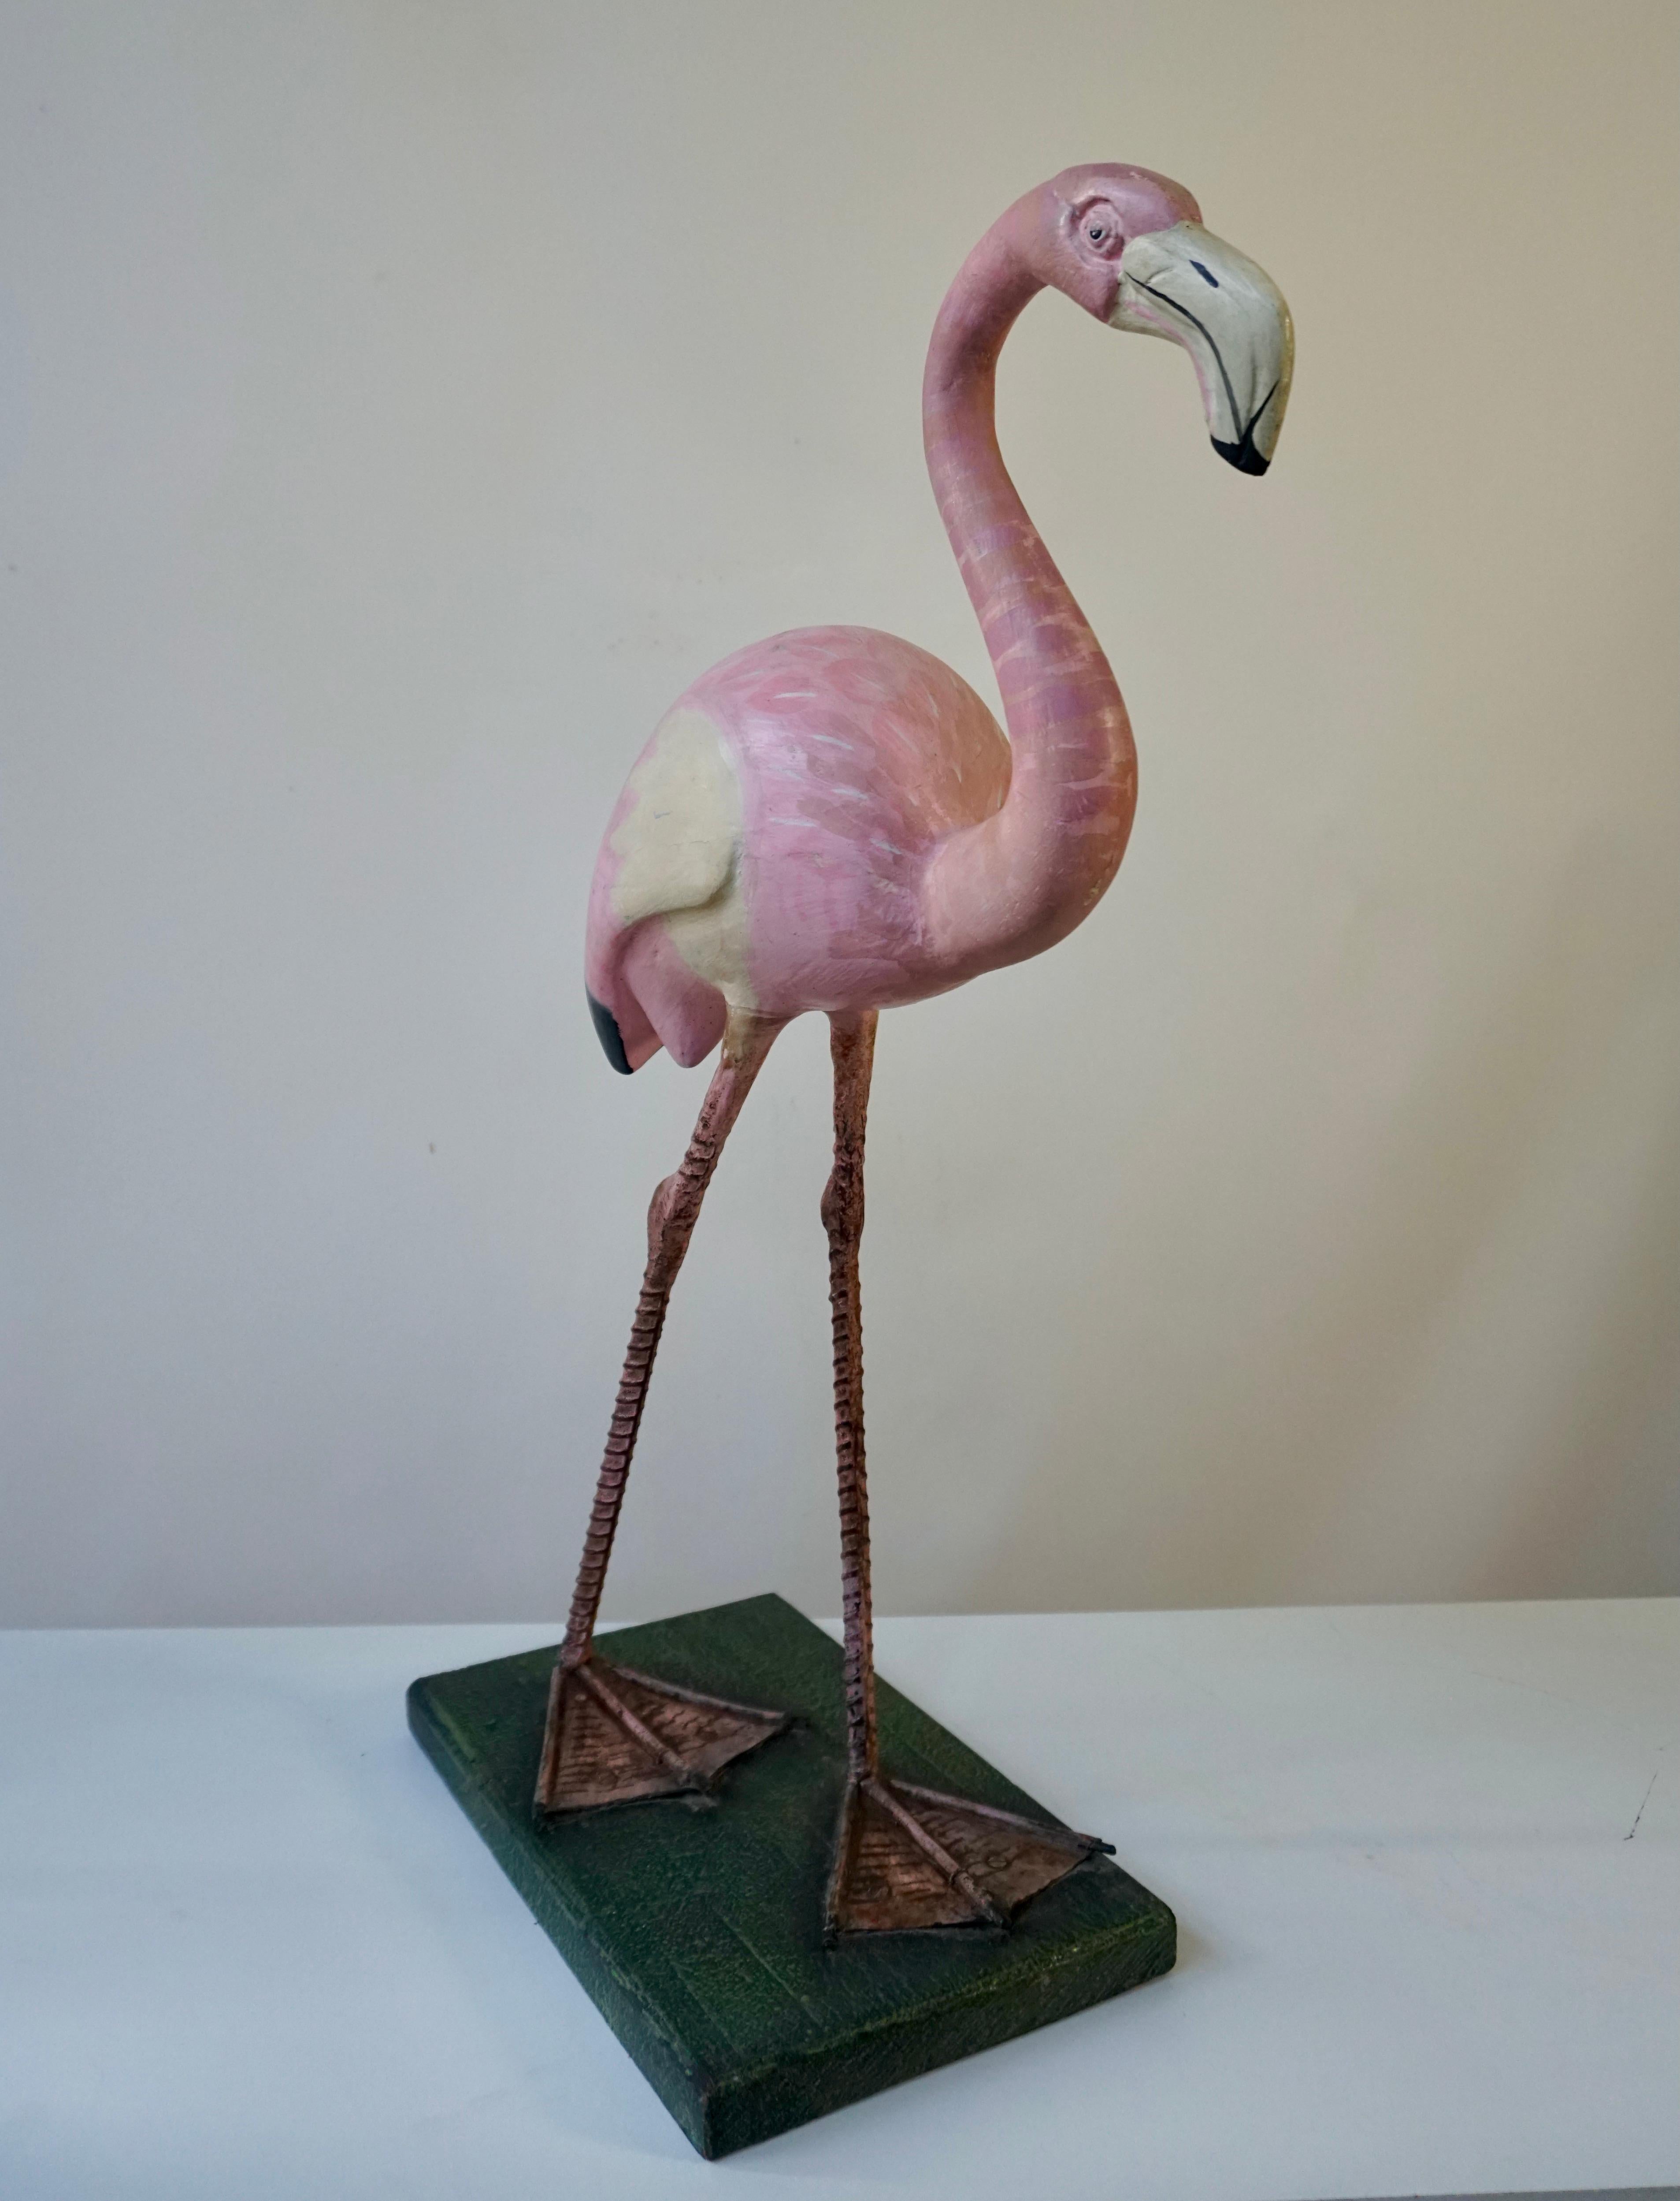 A fine and rare decorative pink flamingo which would make a decorative feature in any home, garden, pond or swimming pool.
Cheerful and true to nature with beautiful colors.

Measures: Height 63 cm.
Width 43 cm.
Depth 20 cm.